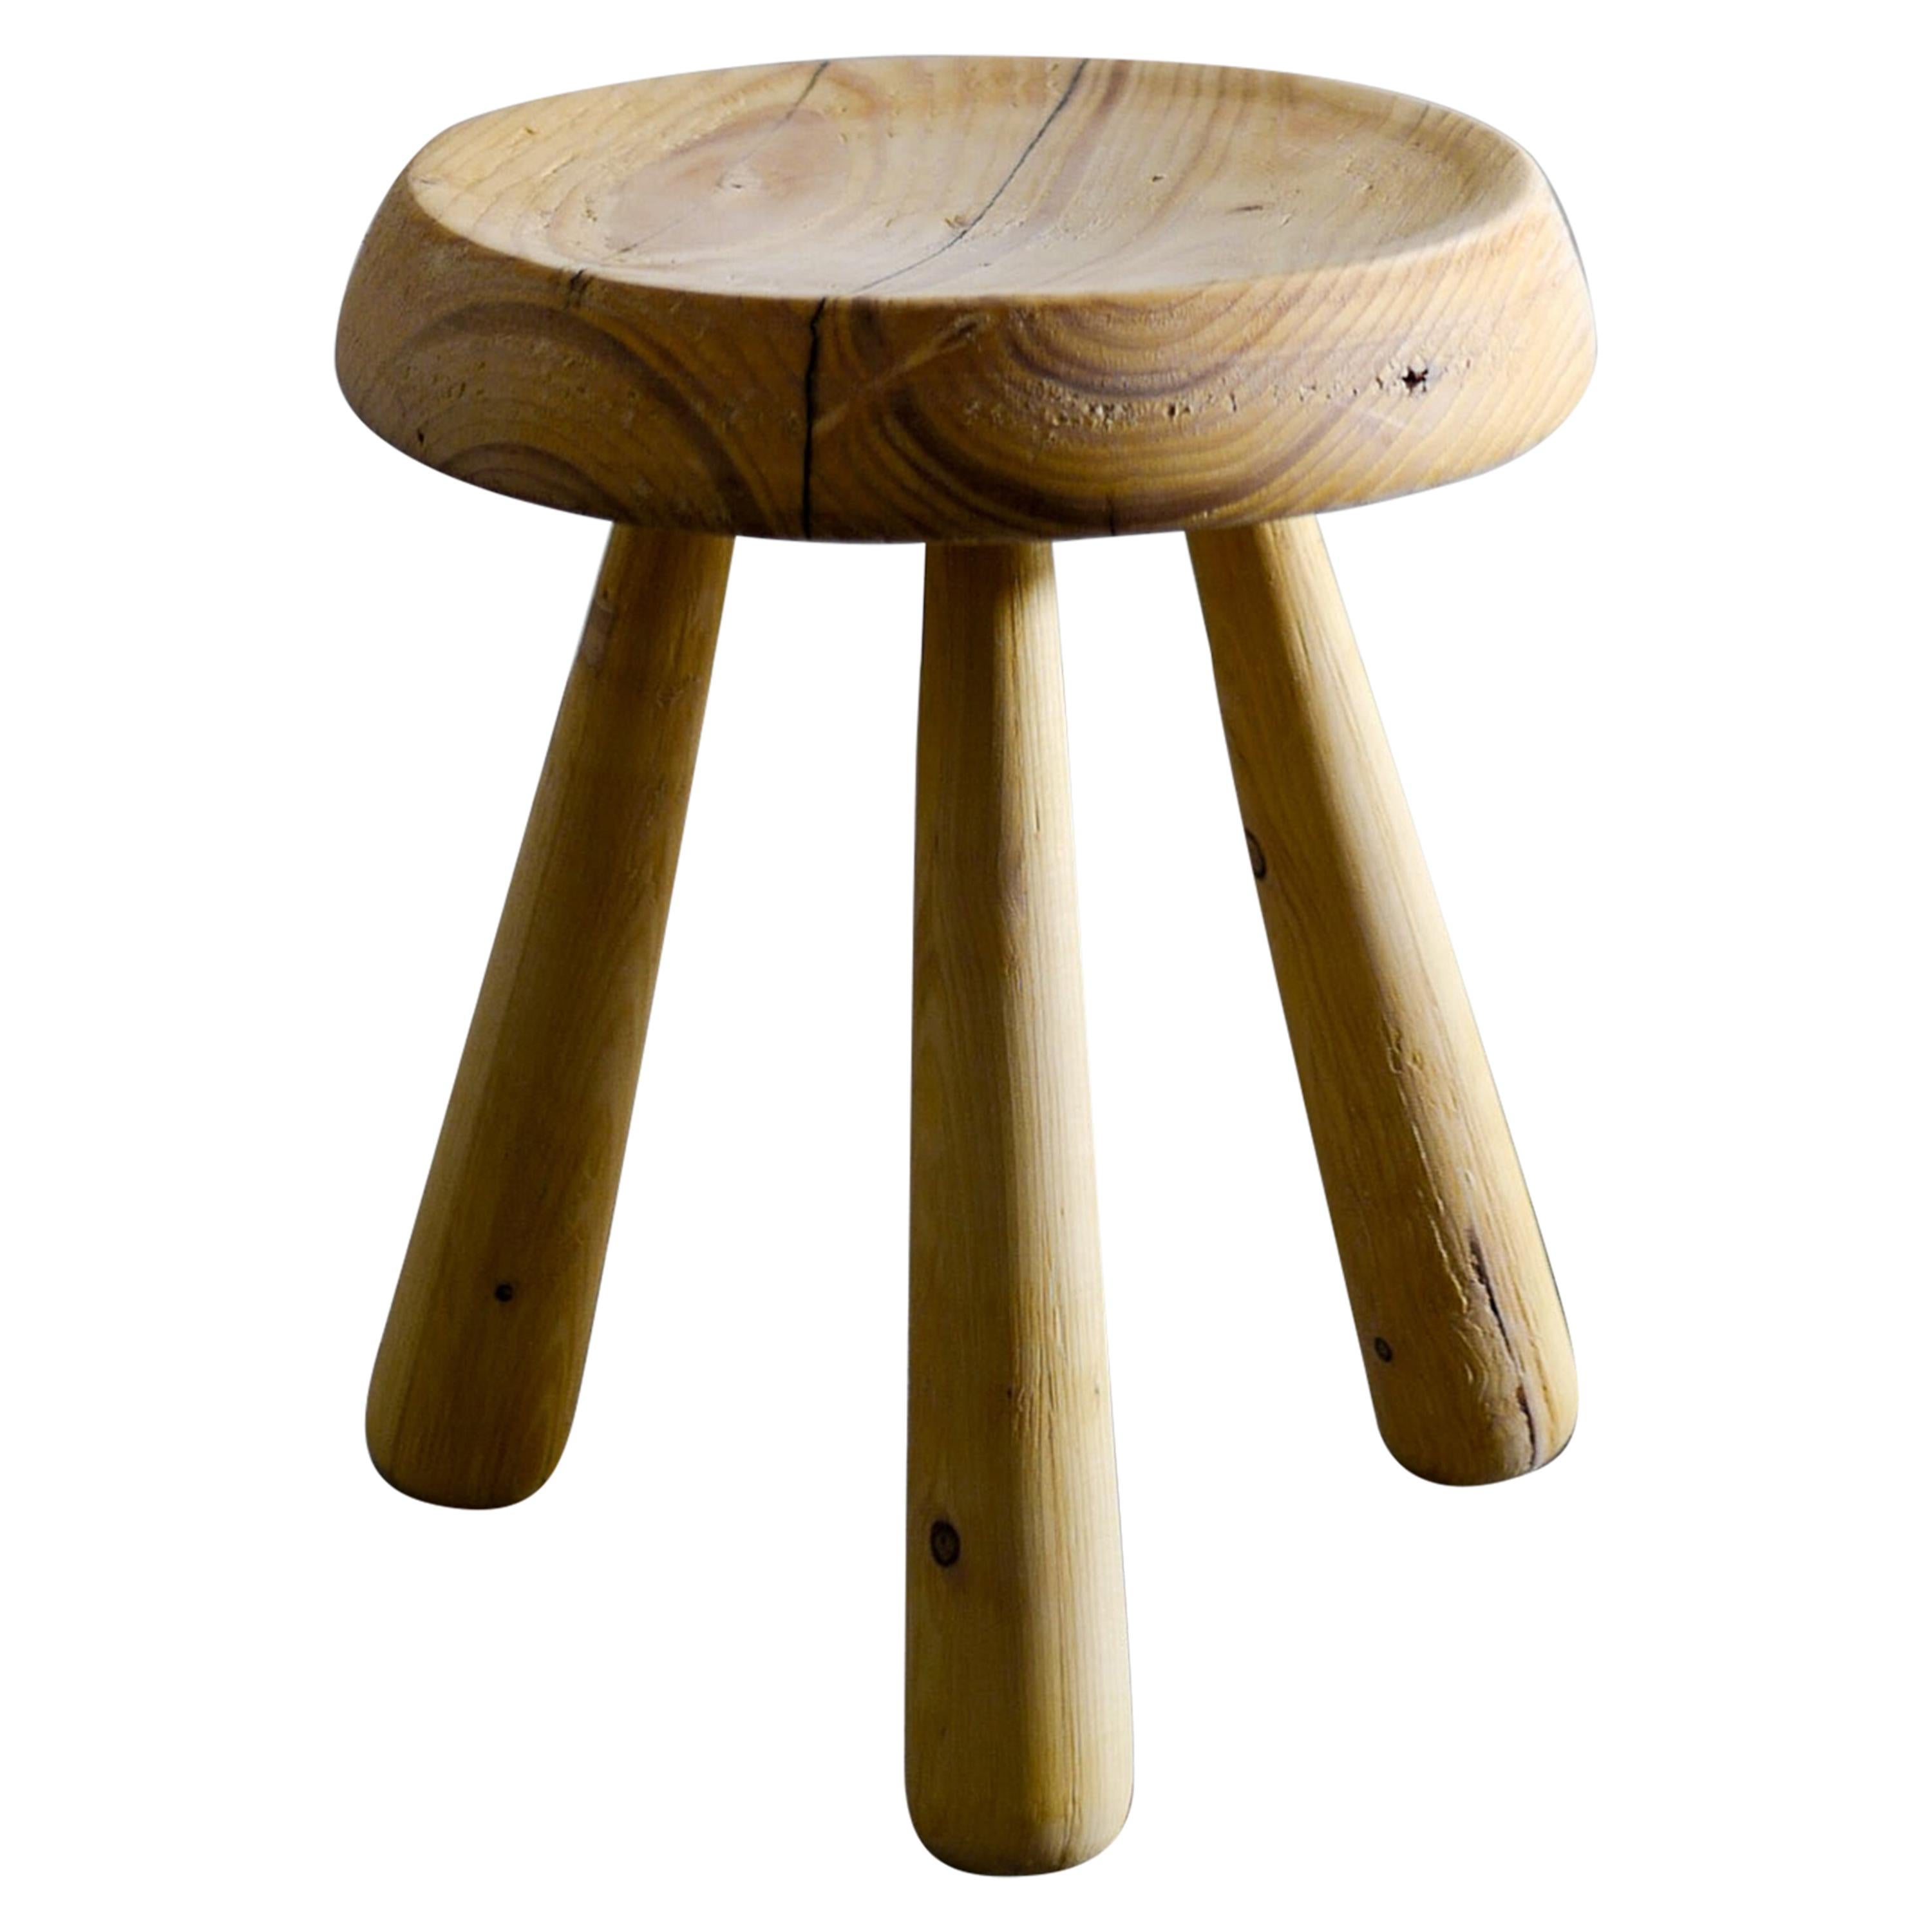 Swedish Stool in Pine in Style of Charlotte Perriand